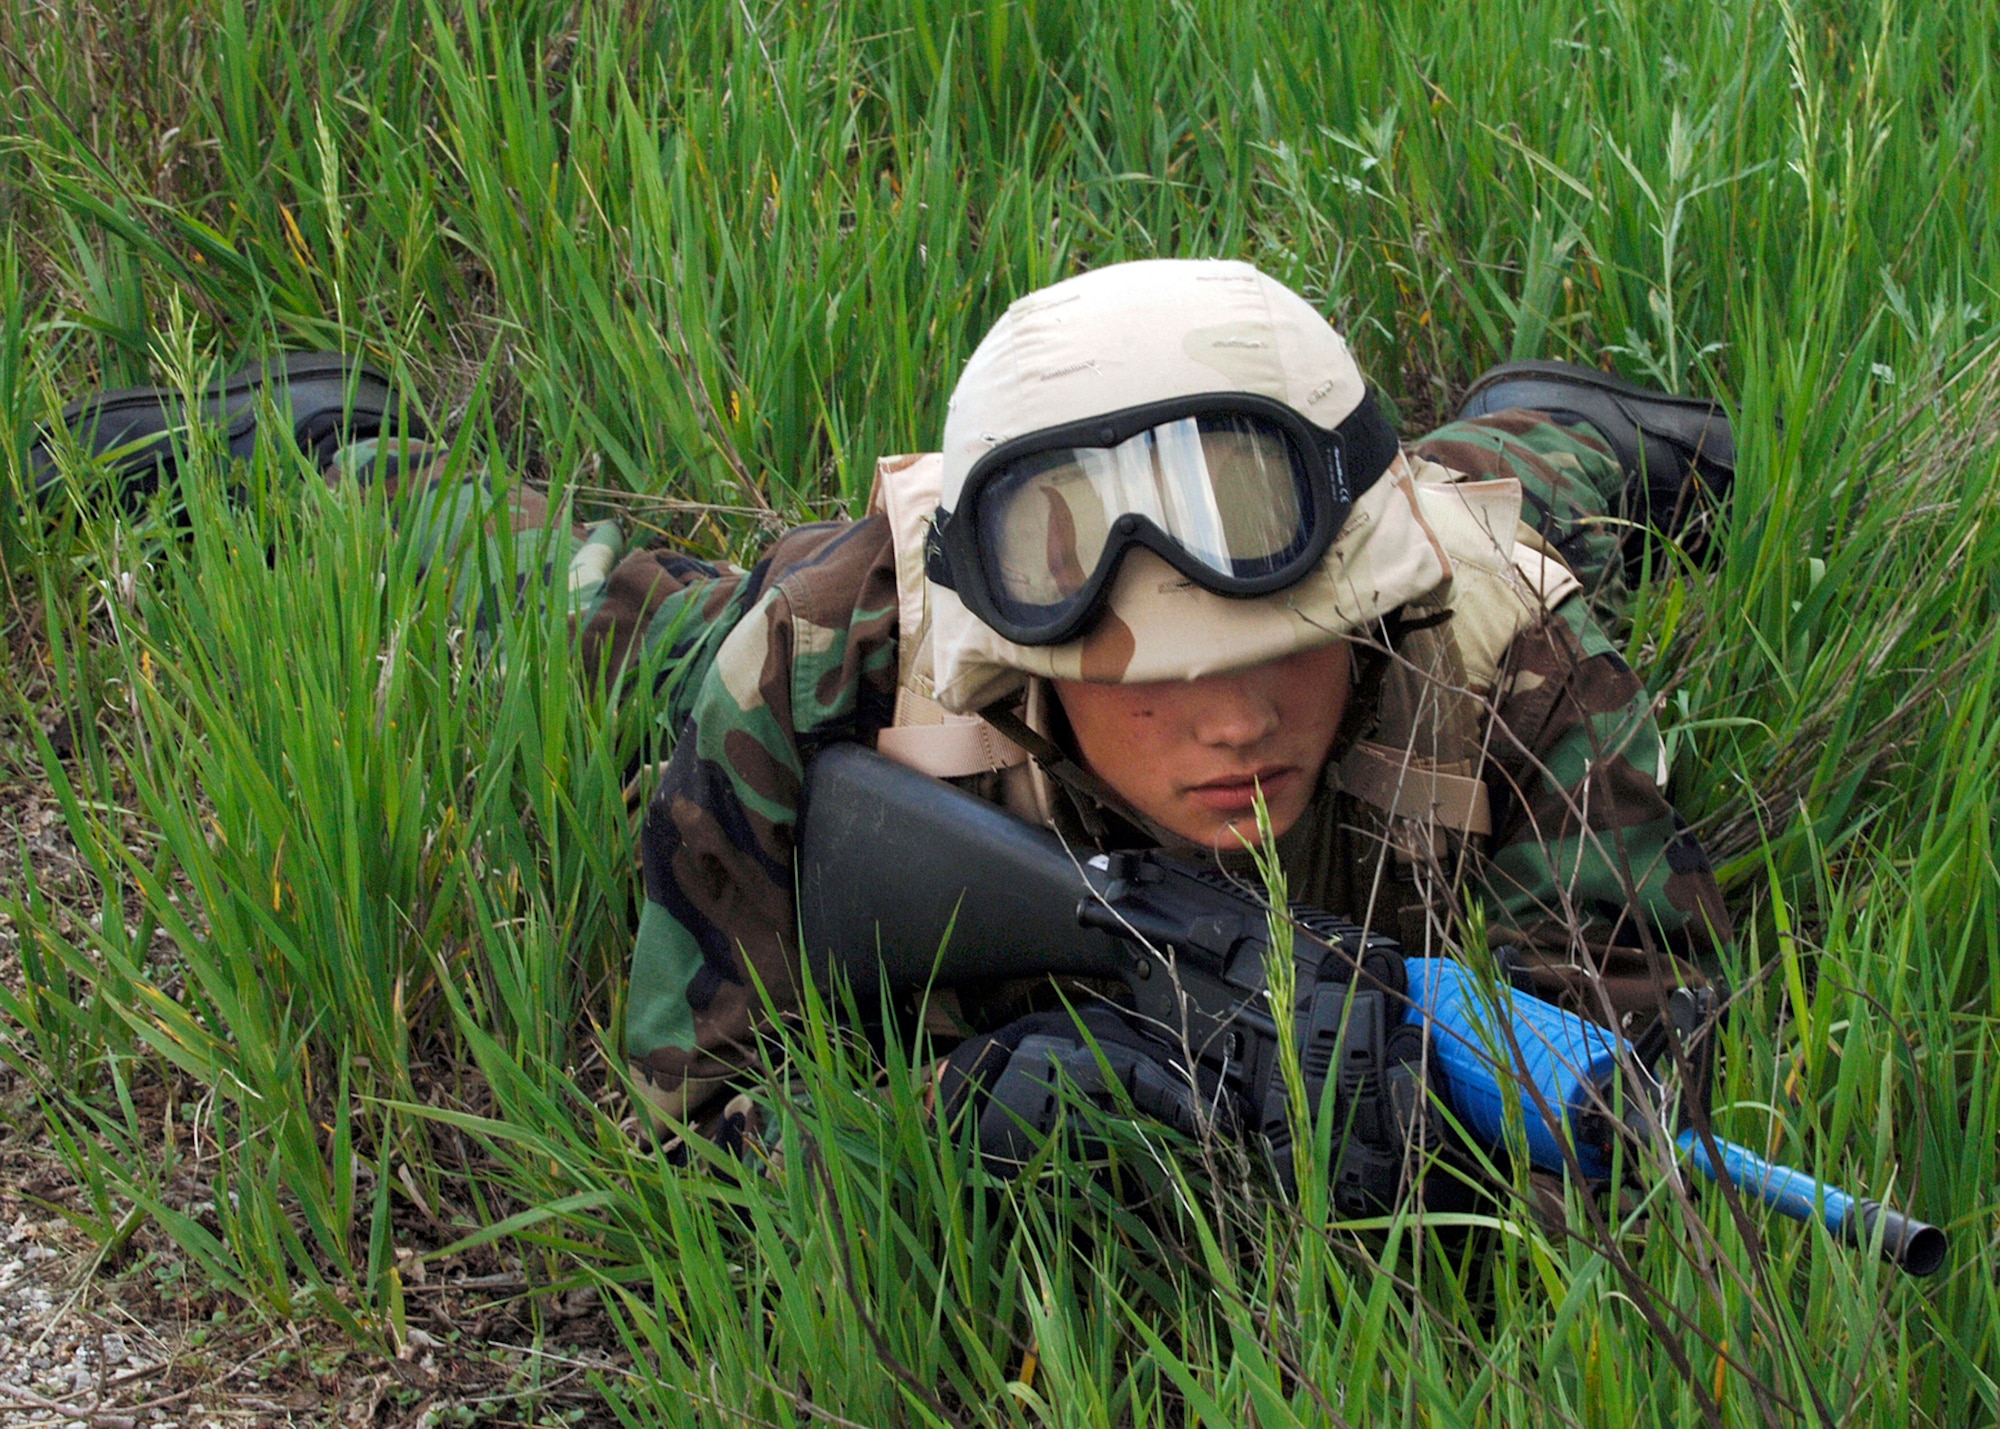 Airman Thomas Sinclair, 22nd Maintenance Squadron, lies in a prone position to avoid being seen during danger crossings during the field training portion of the Combat Skill Training course near the base obstacle course May 11. (Photo by Airman Justin Shelton) 